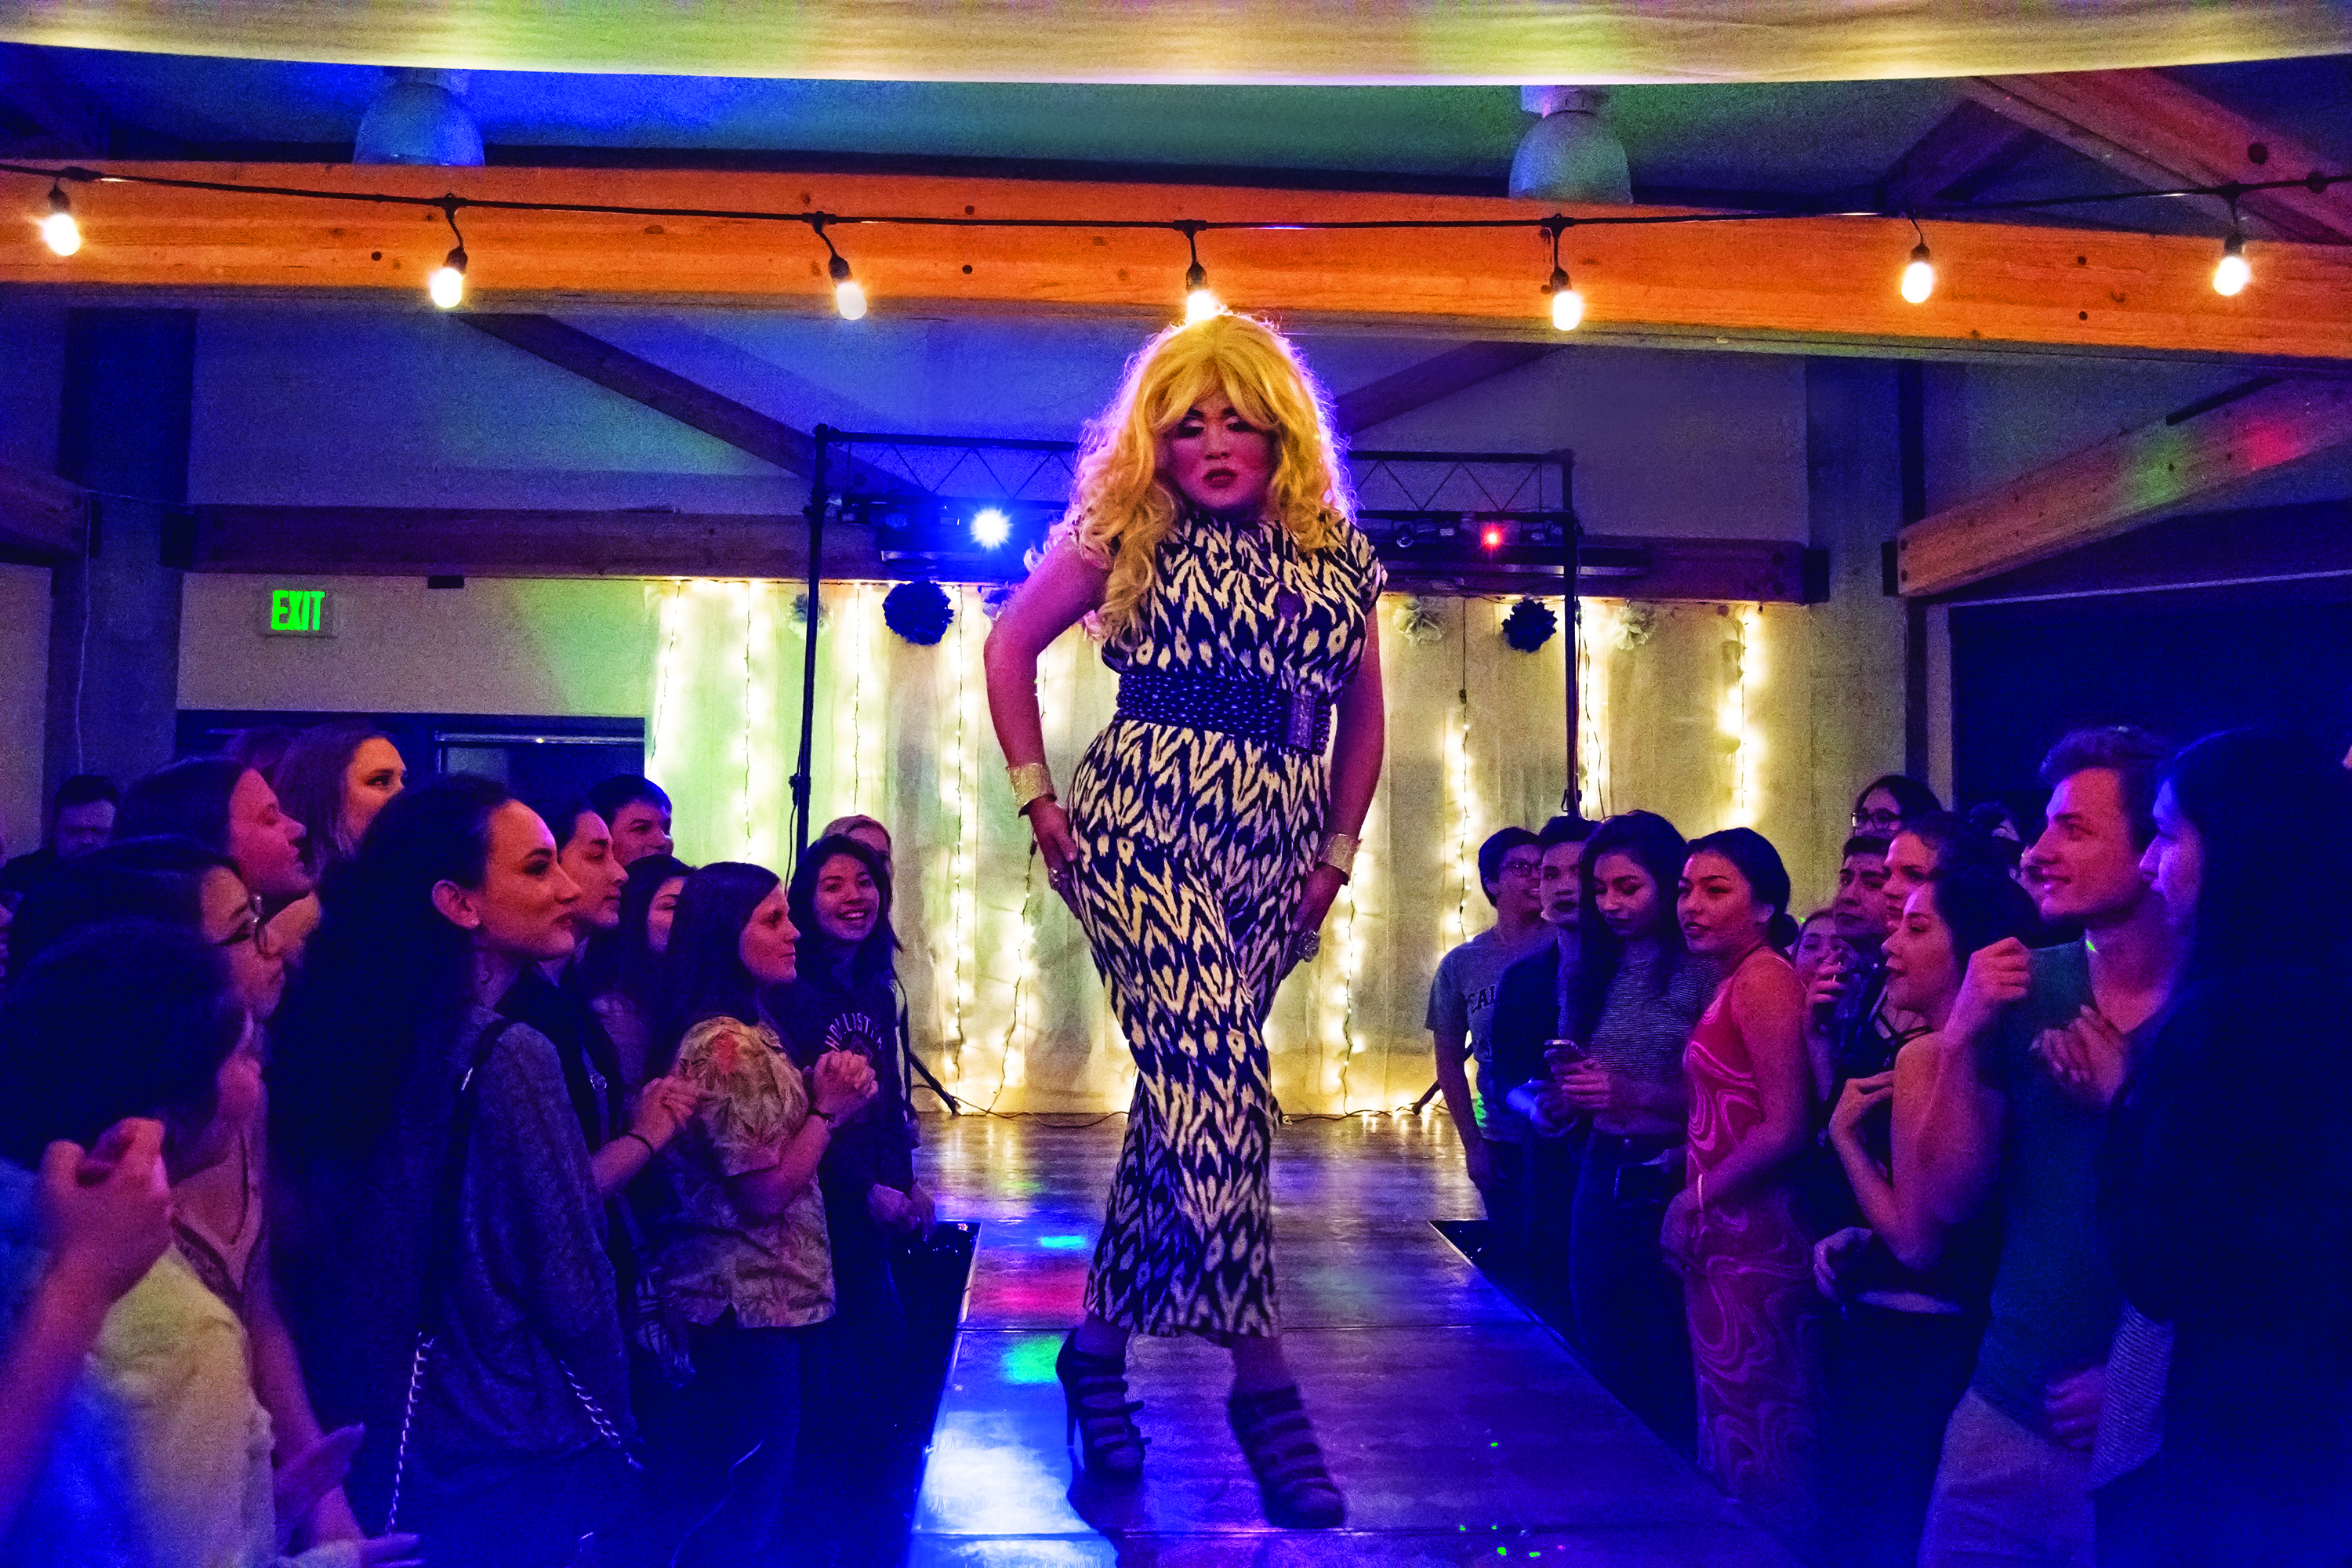 Sally Struts is one of three professional drag performers making up Girl Trouble. The group performed at the annual Drag Ball last Friday night. Photo by Megan Schnabel